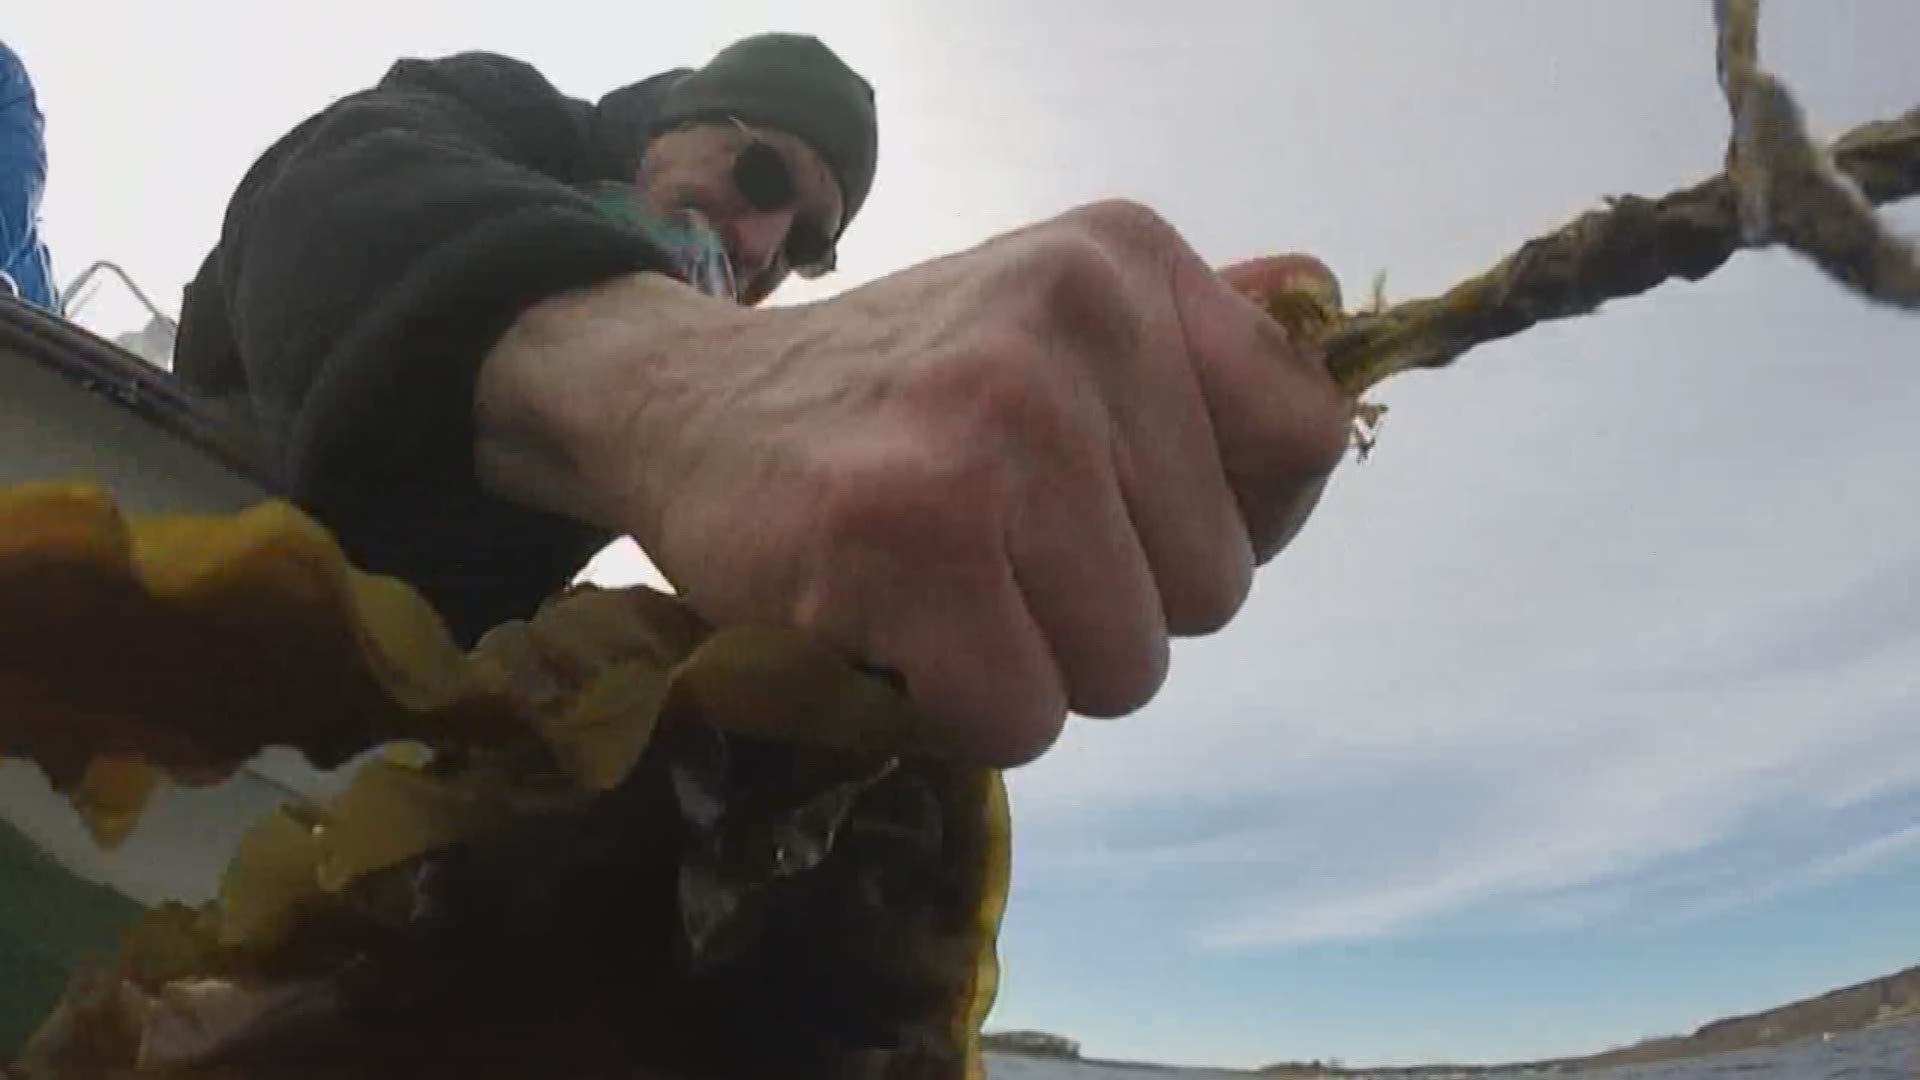 A local Maine man is fishing for kelp and won $100,000 from Greenlight Maine.